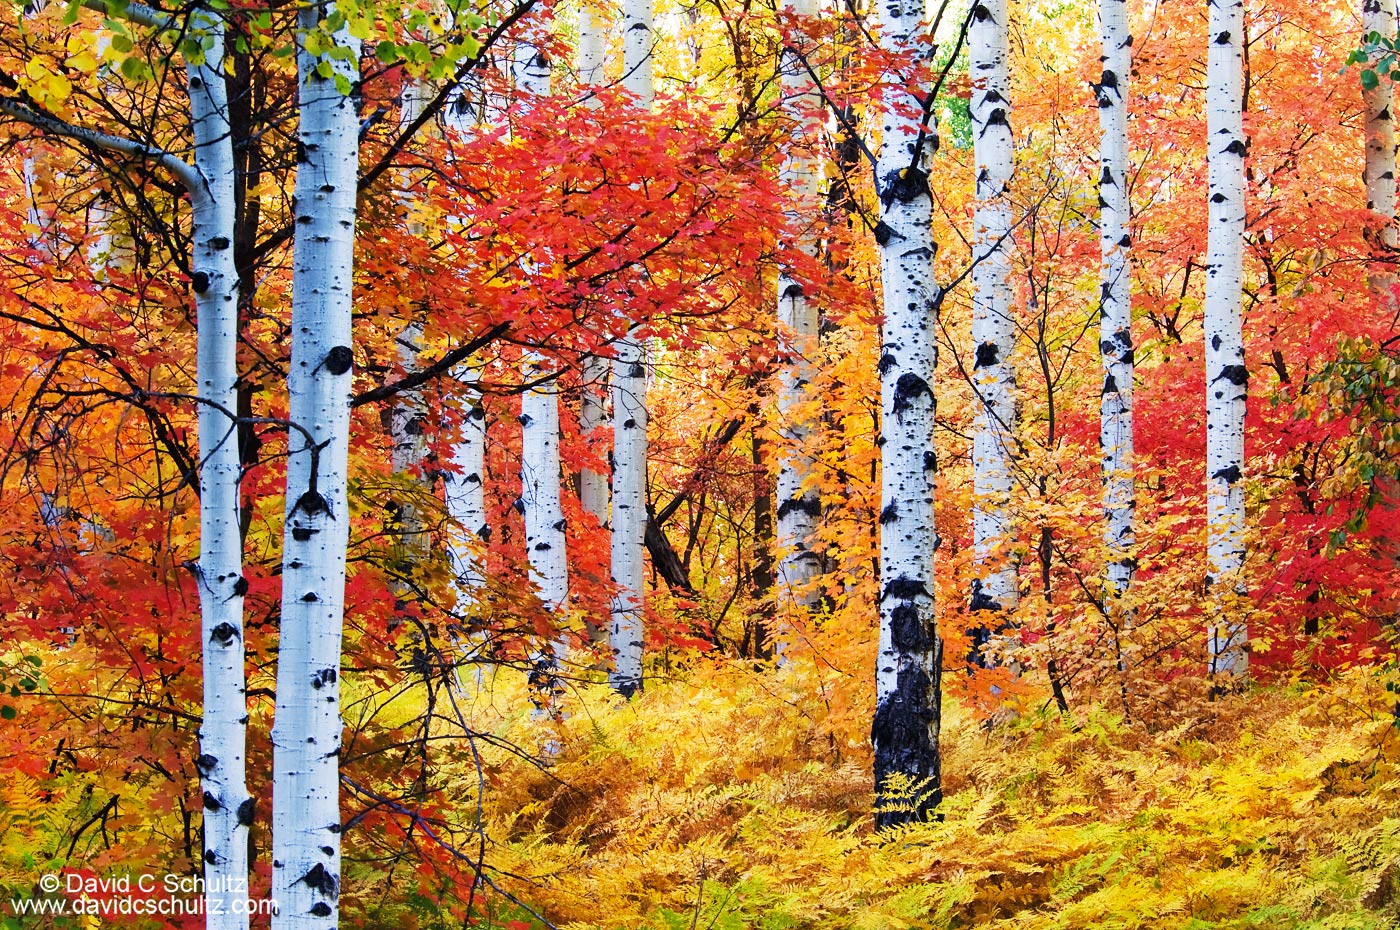 Utah aspen and maple trees in the fall - Image #3-5457